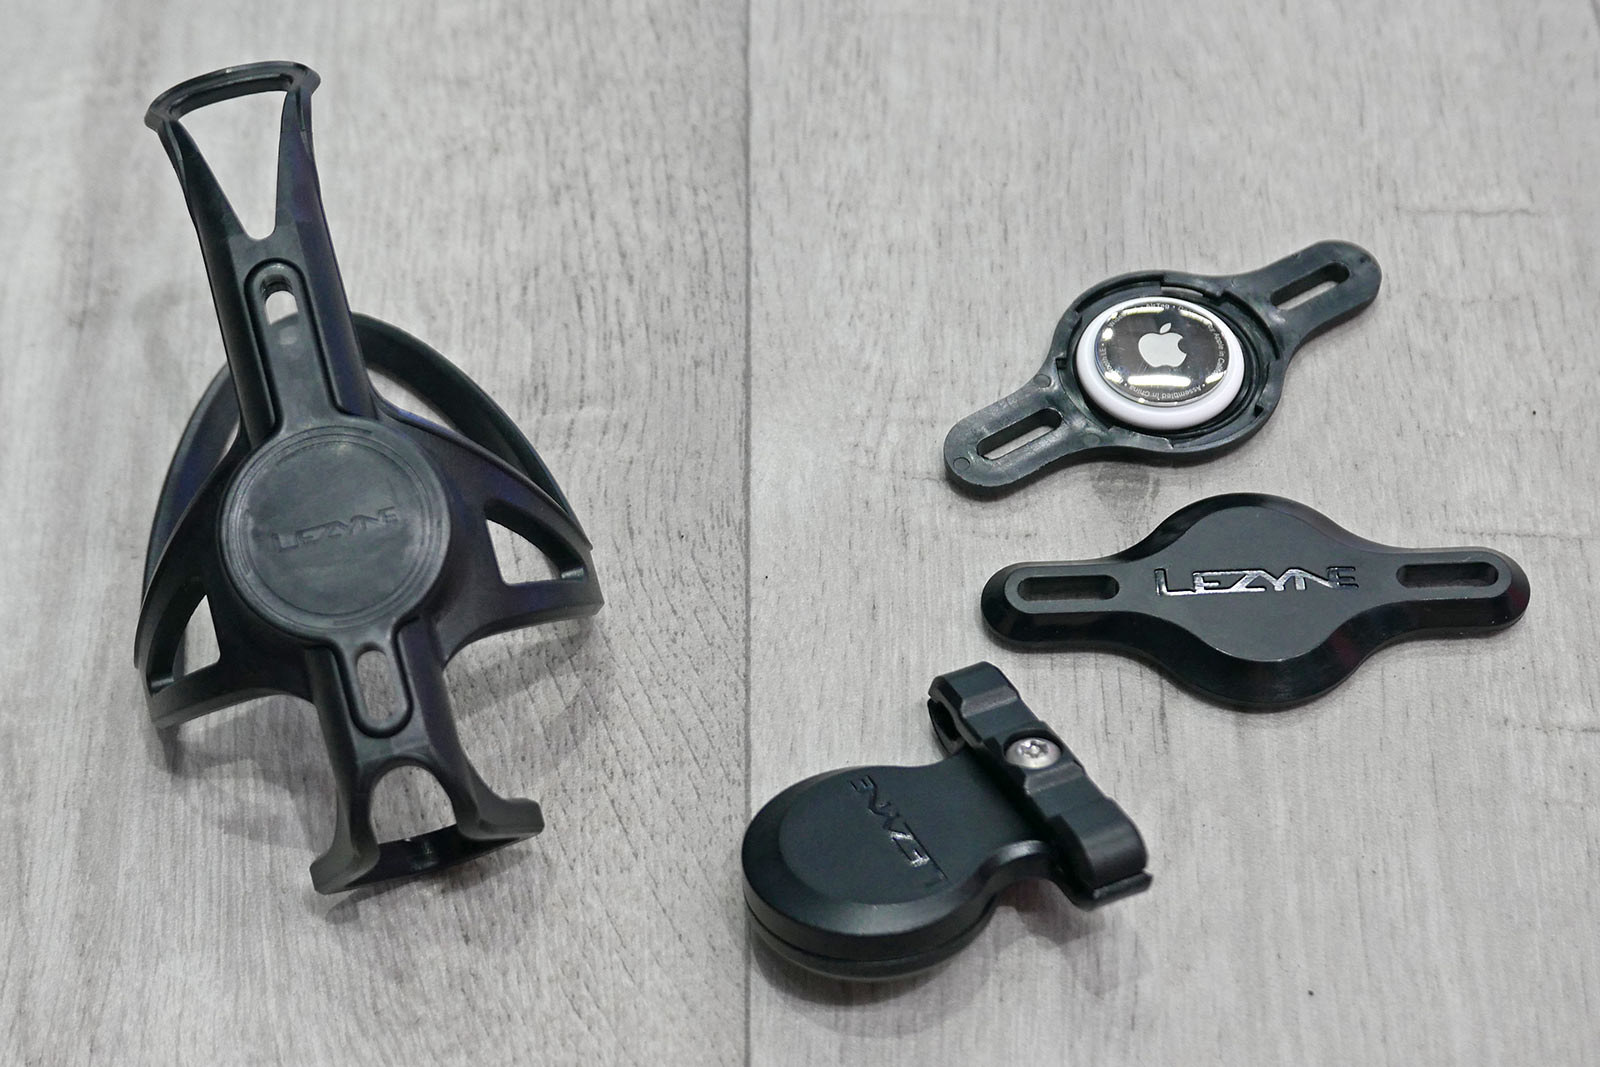 Lezyne Matrix Apple Airtag-equipped trackers